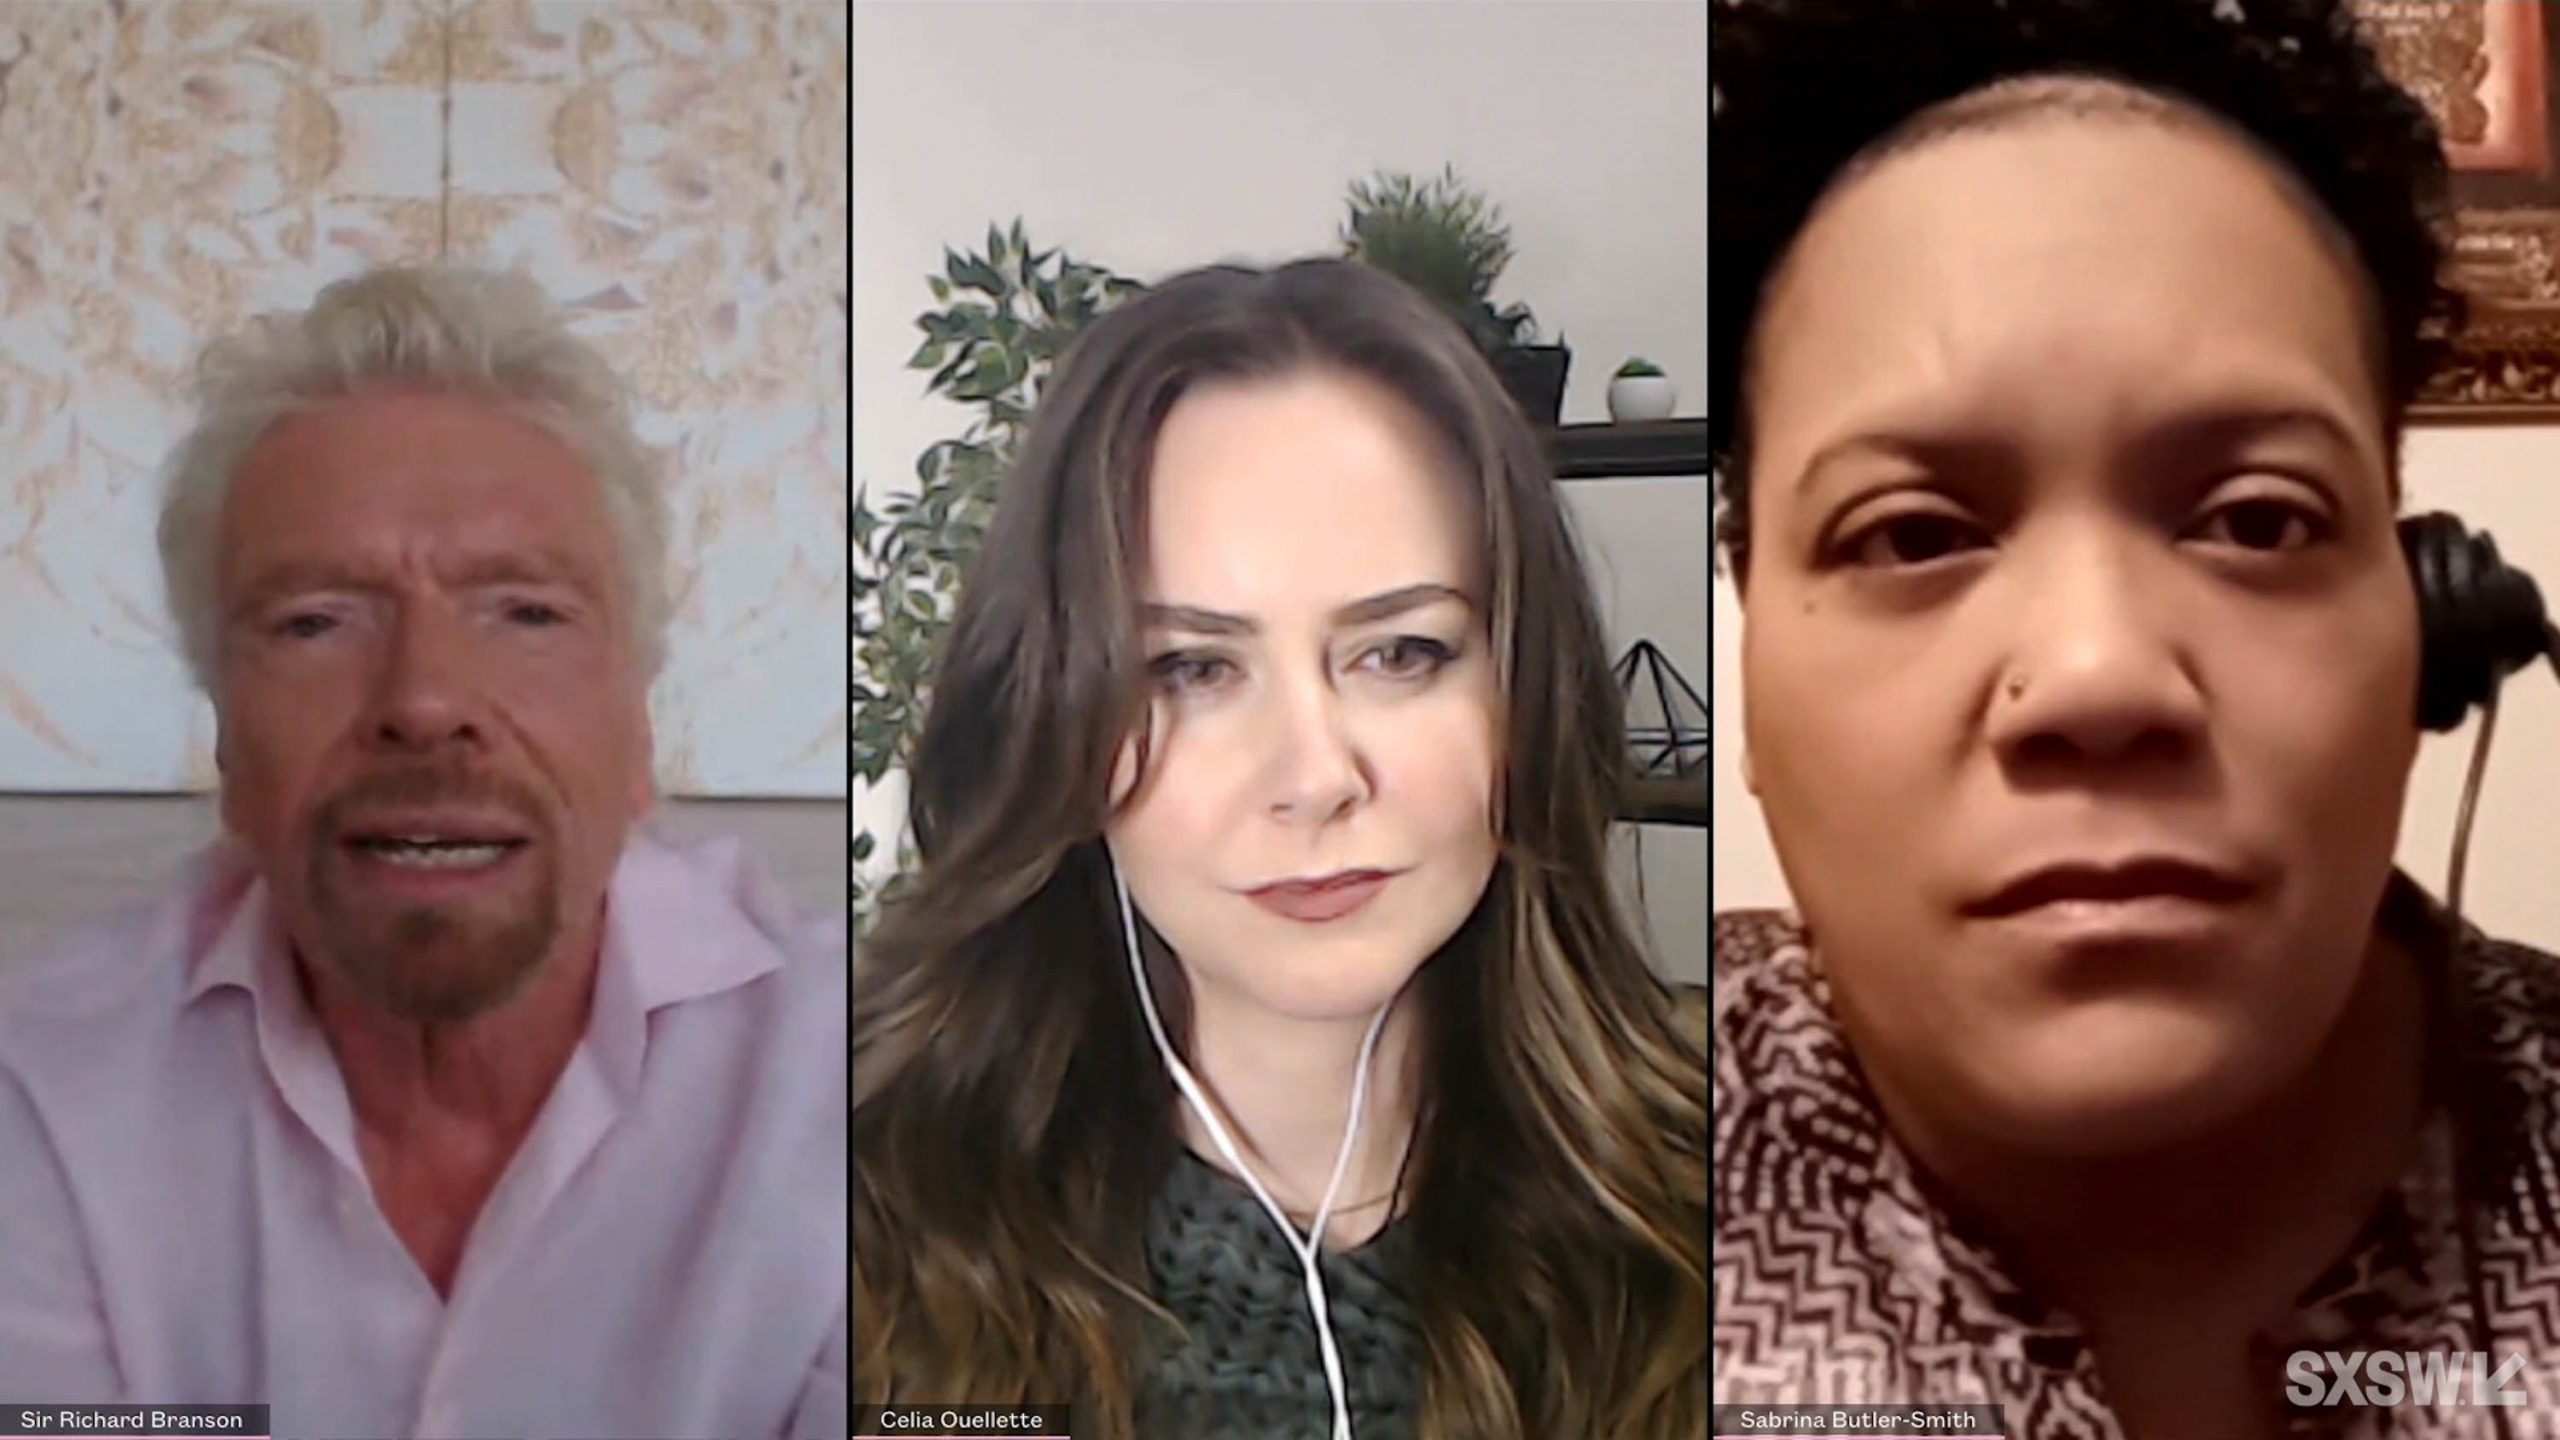 Sir Richard Branson (left), Celia Ouellette (center), and Sabrina Butler-Smith (right) speak at the featured session “Business Leaders Against the Death Penalty” during SXSW Online on March 18, 2021.